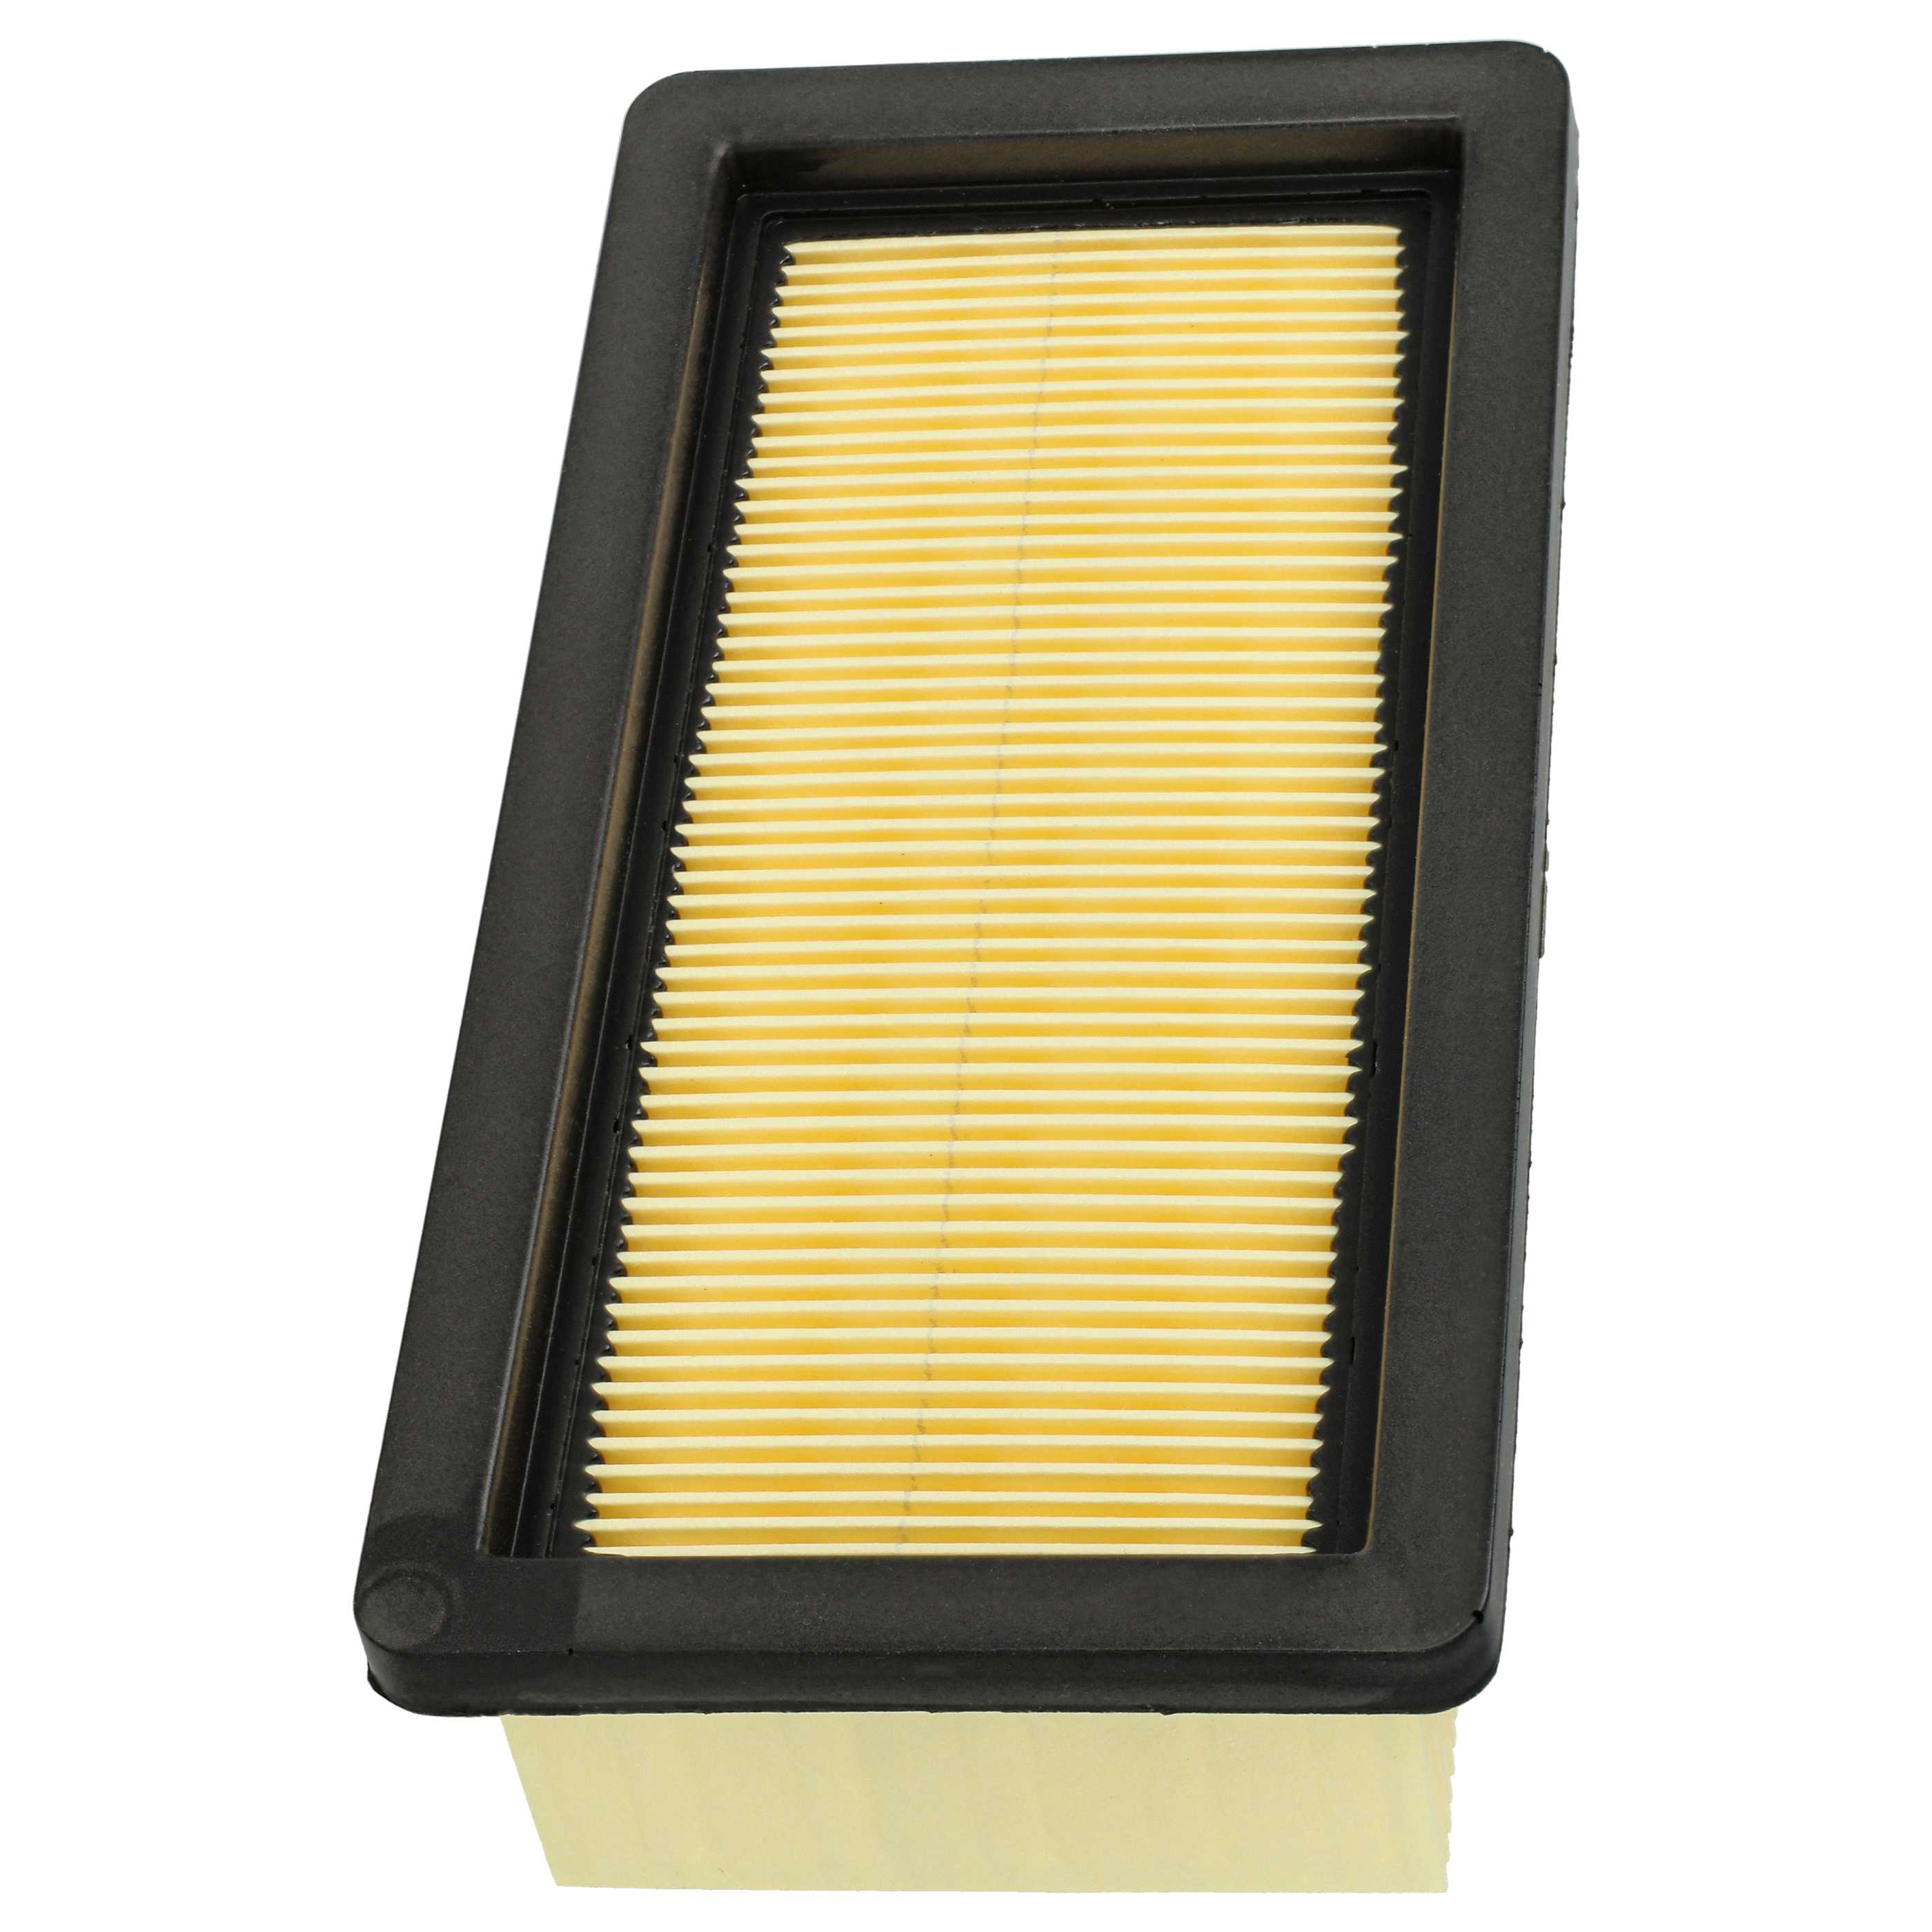 3x flat pleated filter replaces Kärcher 6.414-971.0 for KärcherVacuum Cleaner